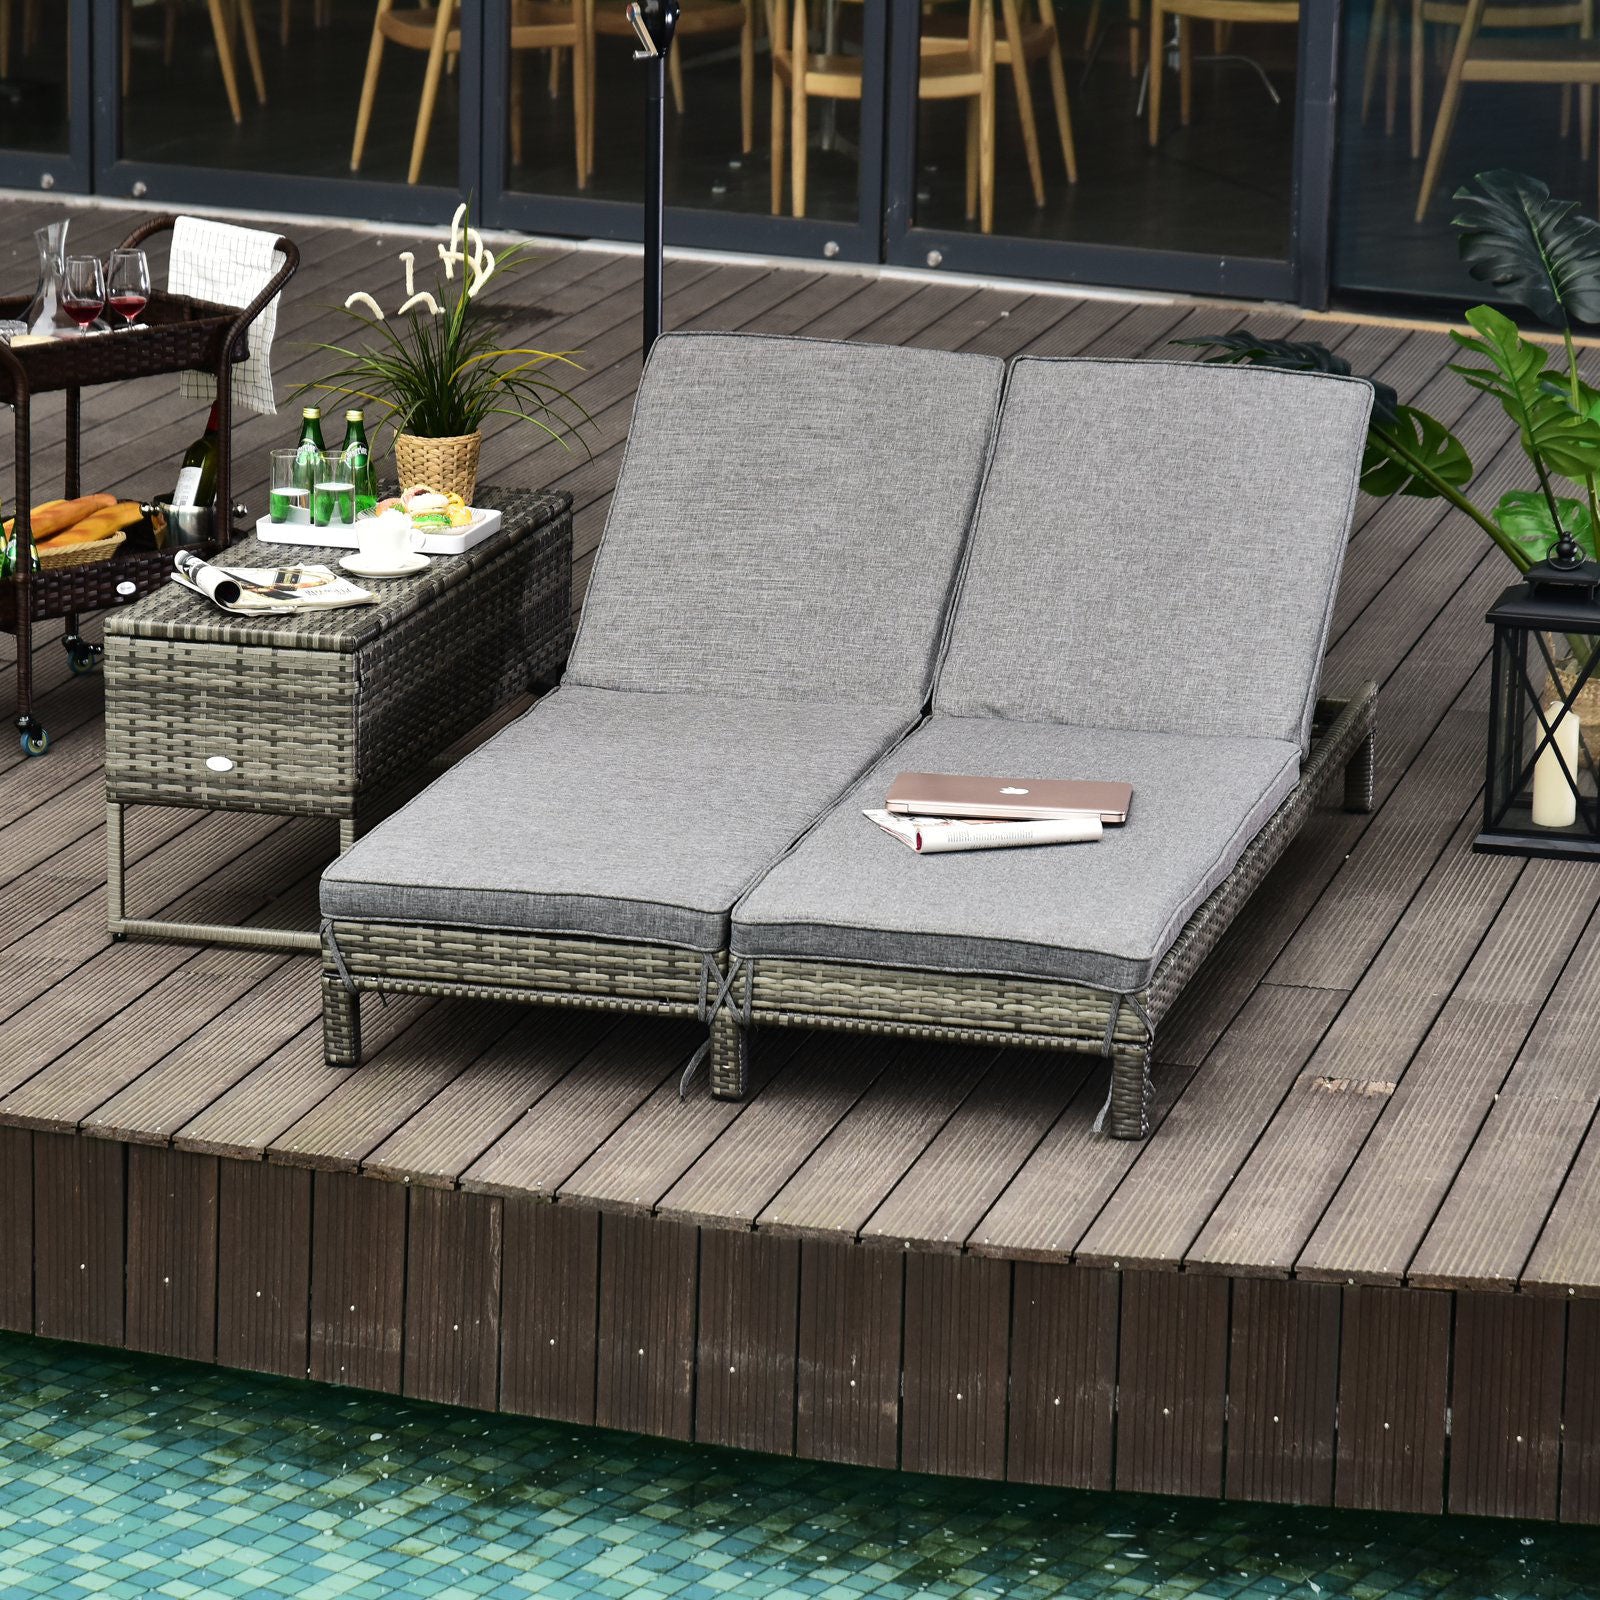 Nancy's Annie Rock Garden Double Lounger - Lounge Bed - Gray